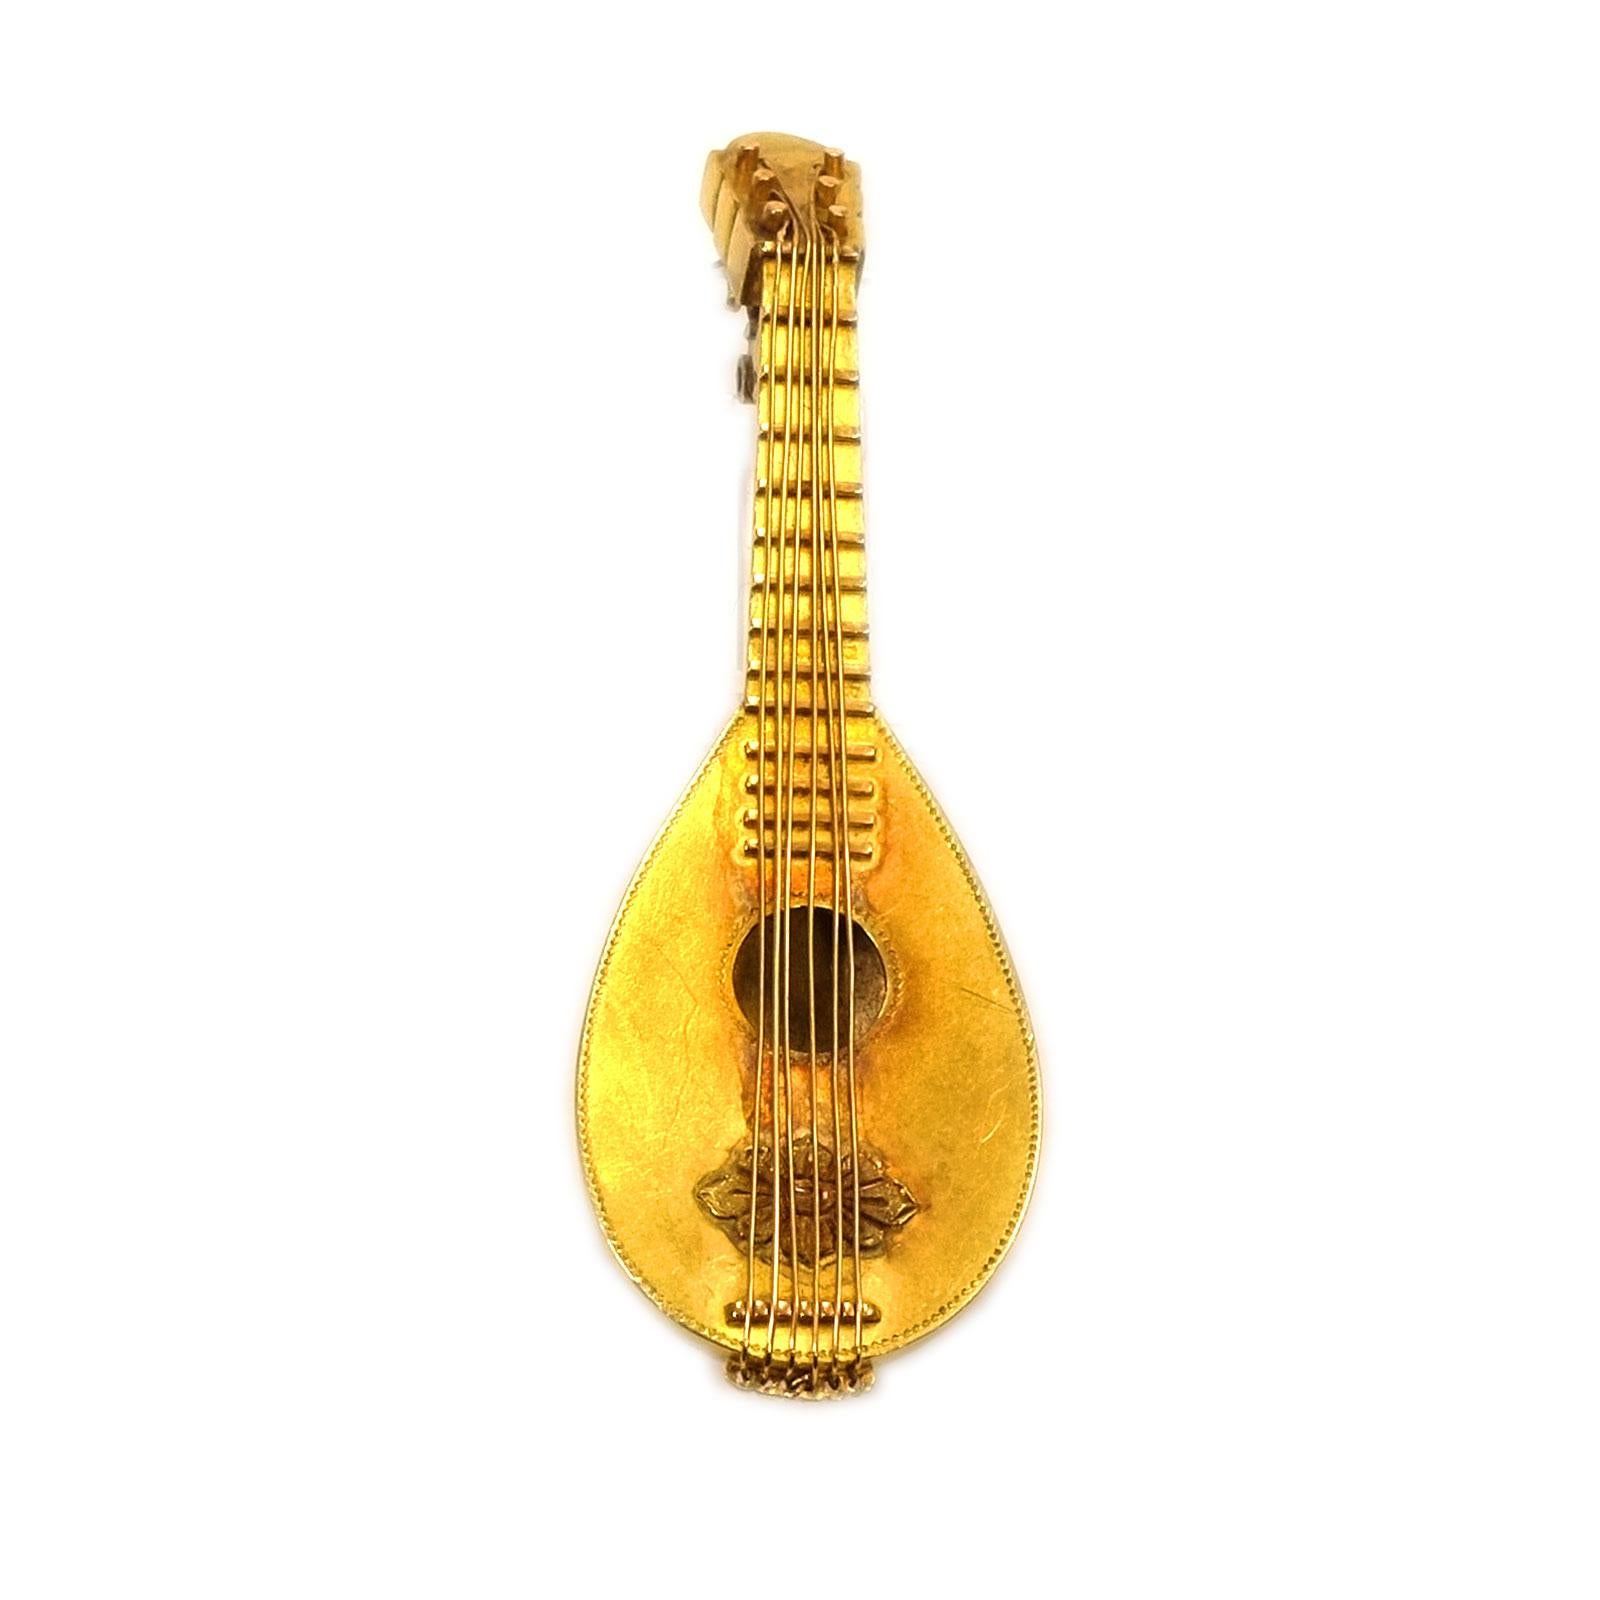 Antique 18K Gold Mandolin Brooch, Paris circa 1880

Delicate gold brooch in the shape of a mandolin, very filigree and detailed, even the six strings have been recreated. Made with exquisite craftsmanship, the attention to detail is outstanding.

